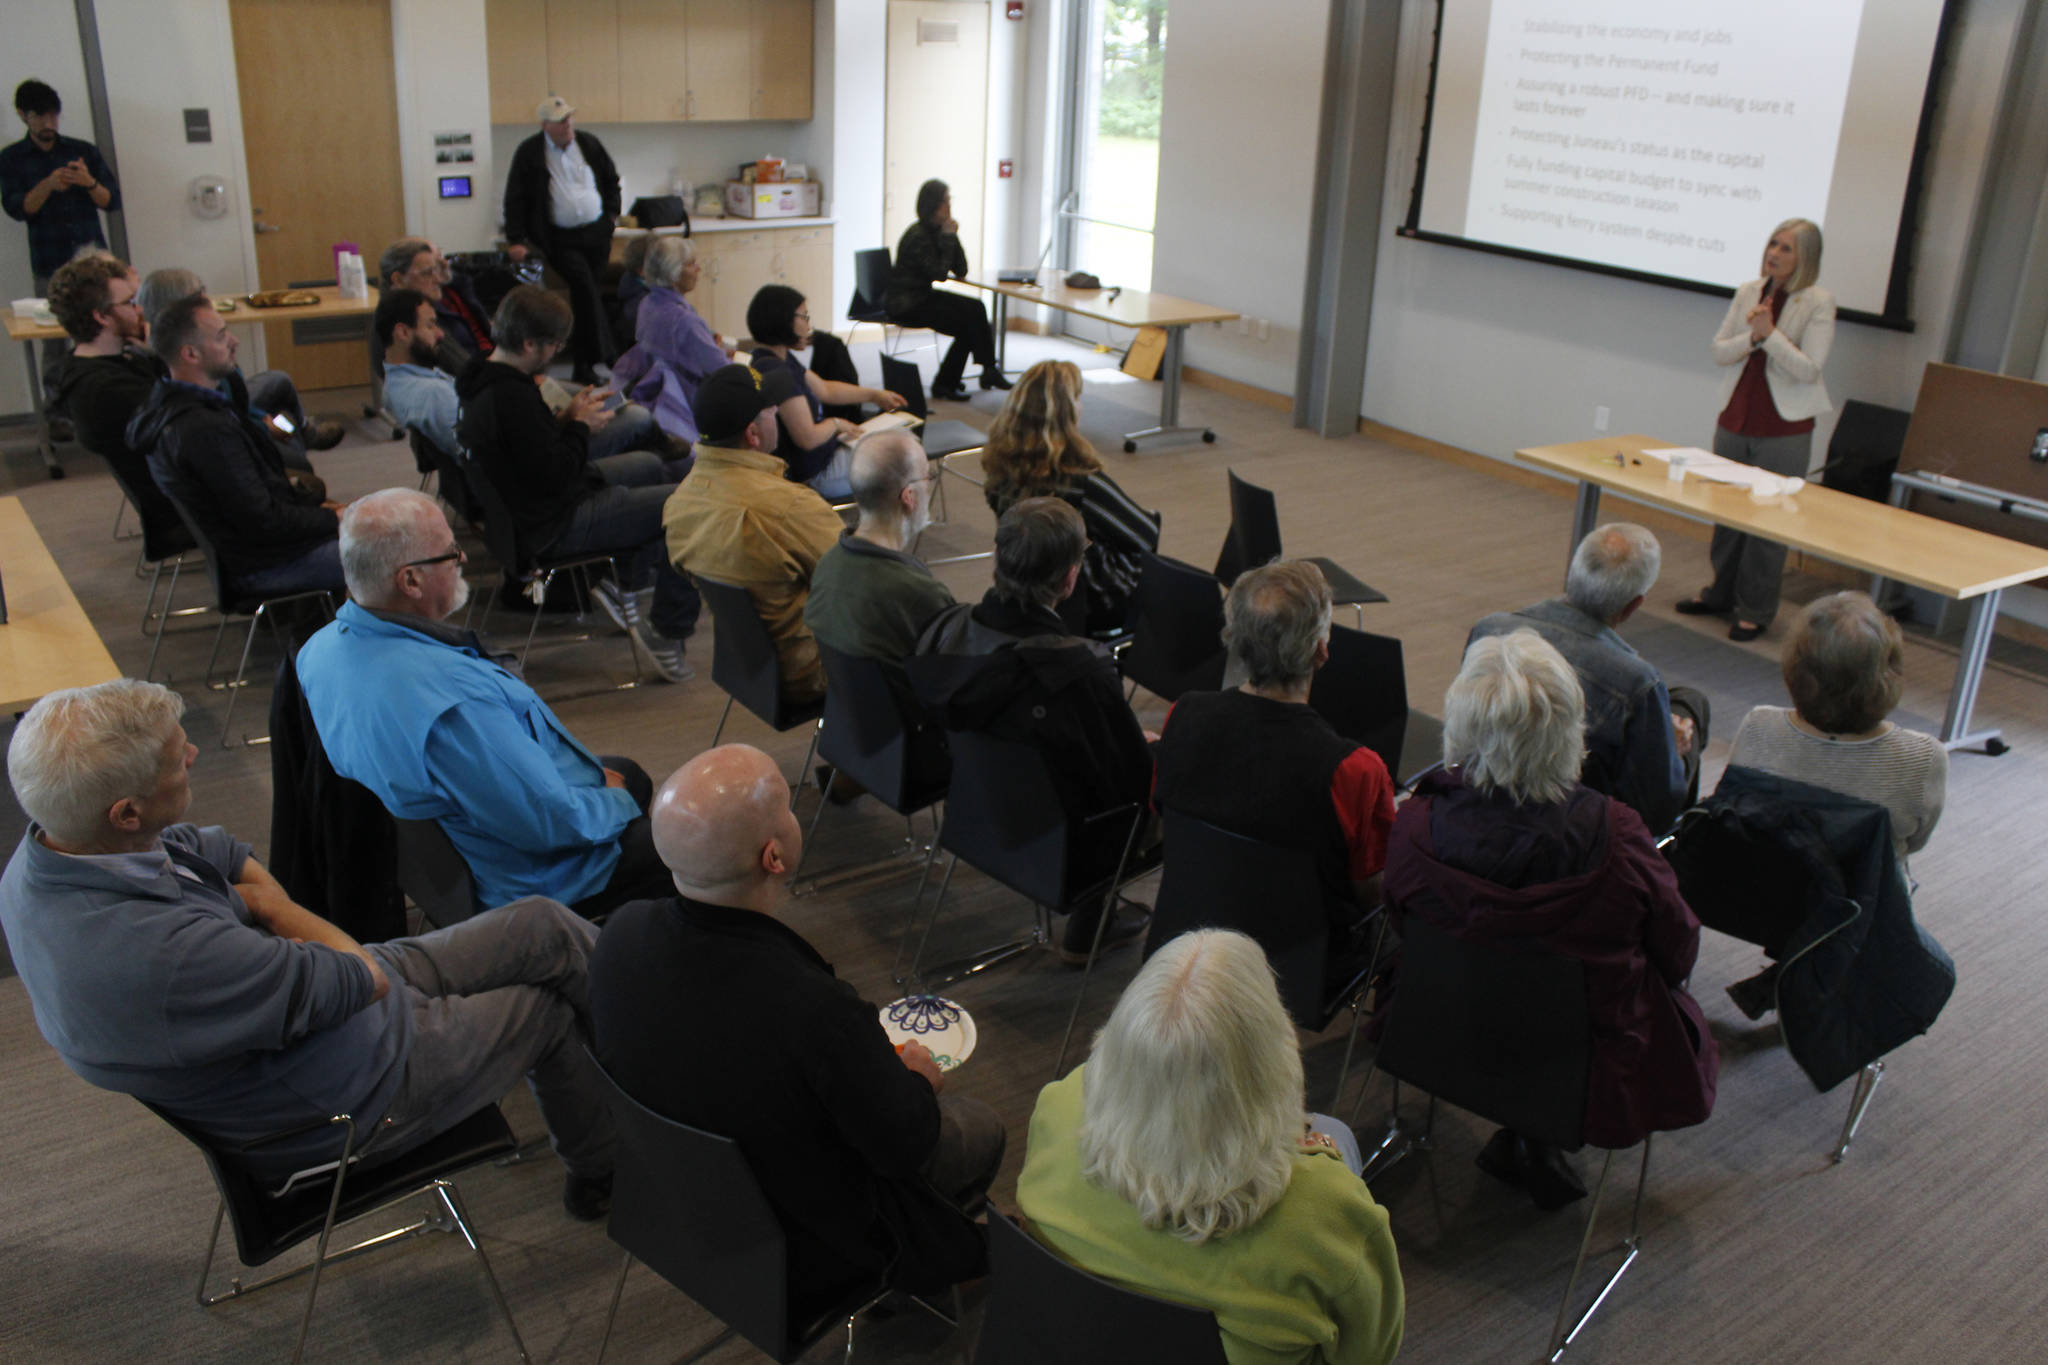 Rep. Andi Story, D-Juneau, addresses a crowd of attendees at a town hall meeting at the Mendenhall Valley Public Library on Wednesday, June 19, 2019. (Alex McCarthy | Juneau Empire)